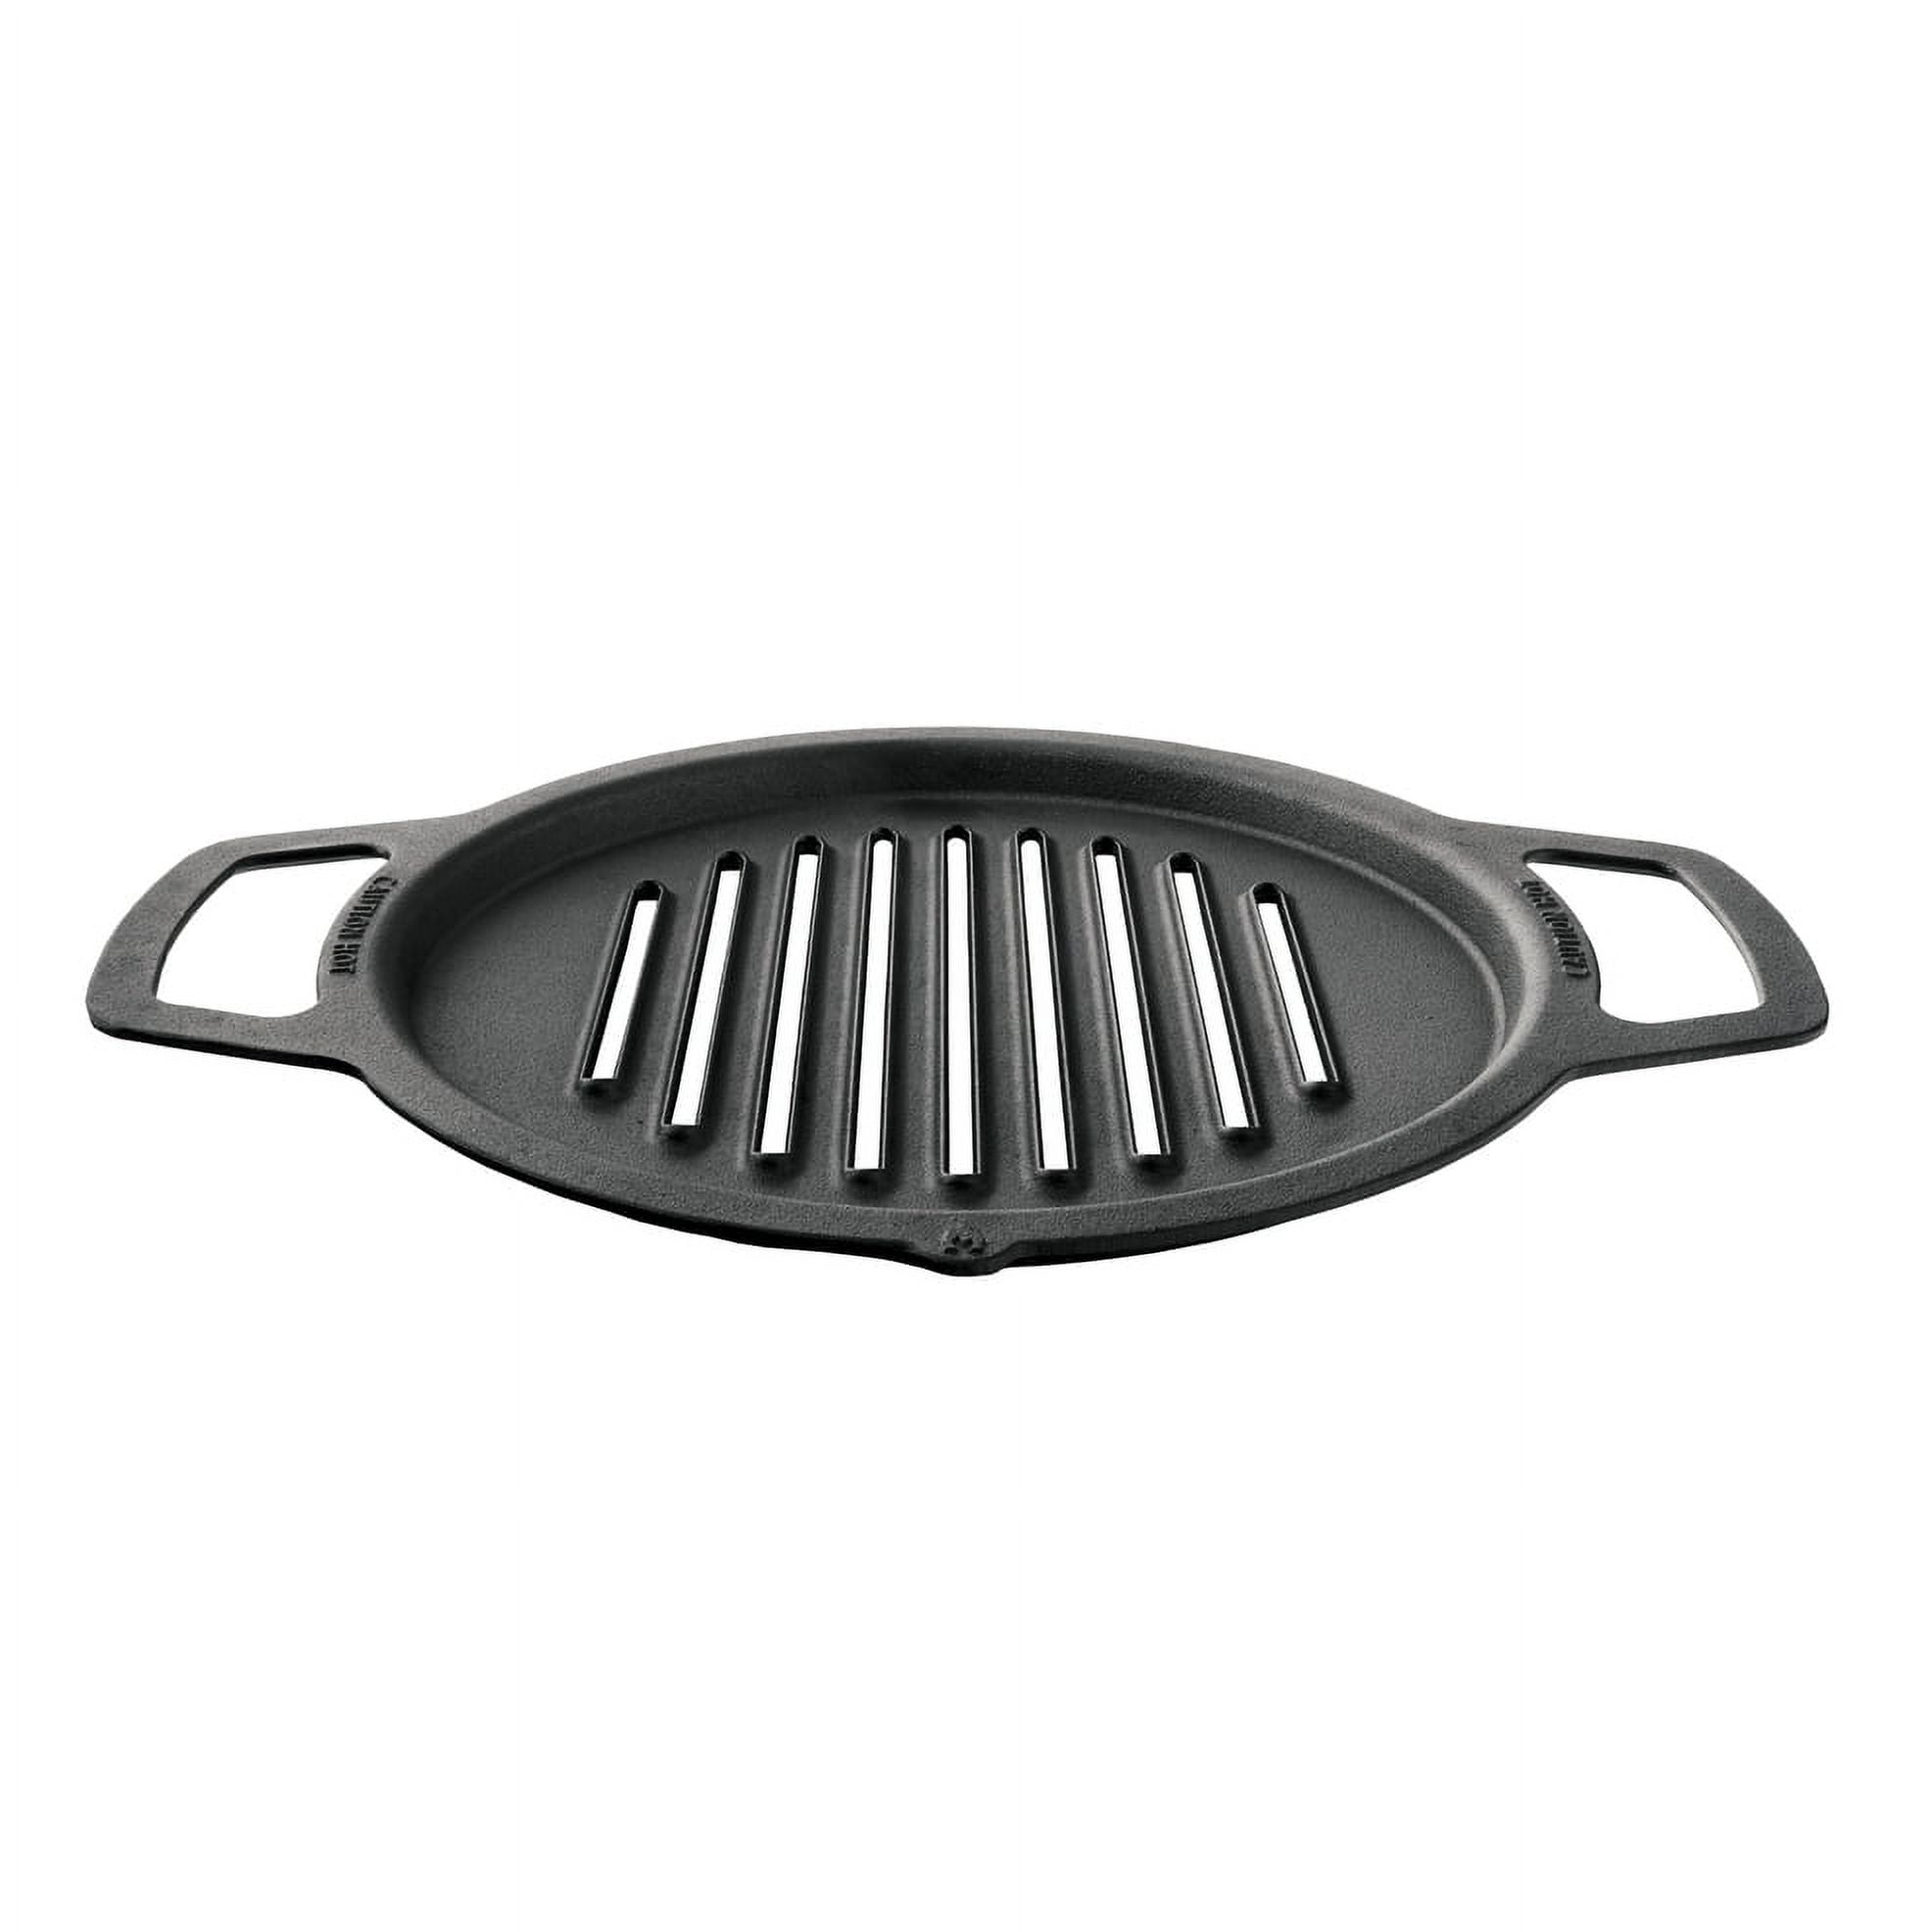 Solo Stove Cast Iron Grill Top And Cooking Hub For The Ranger Wood